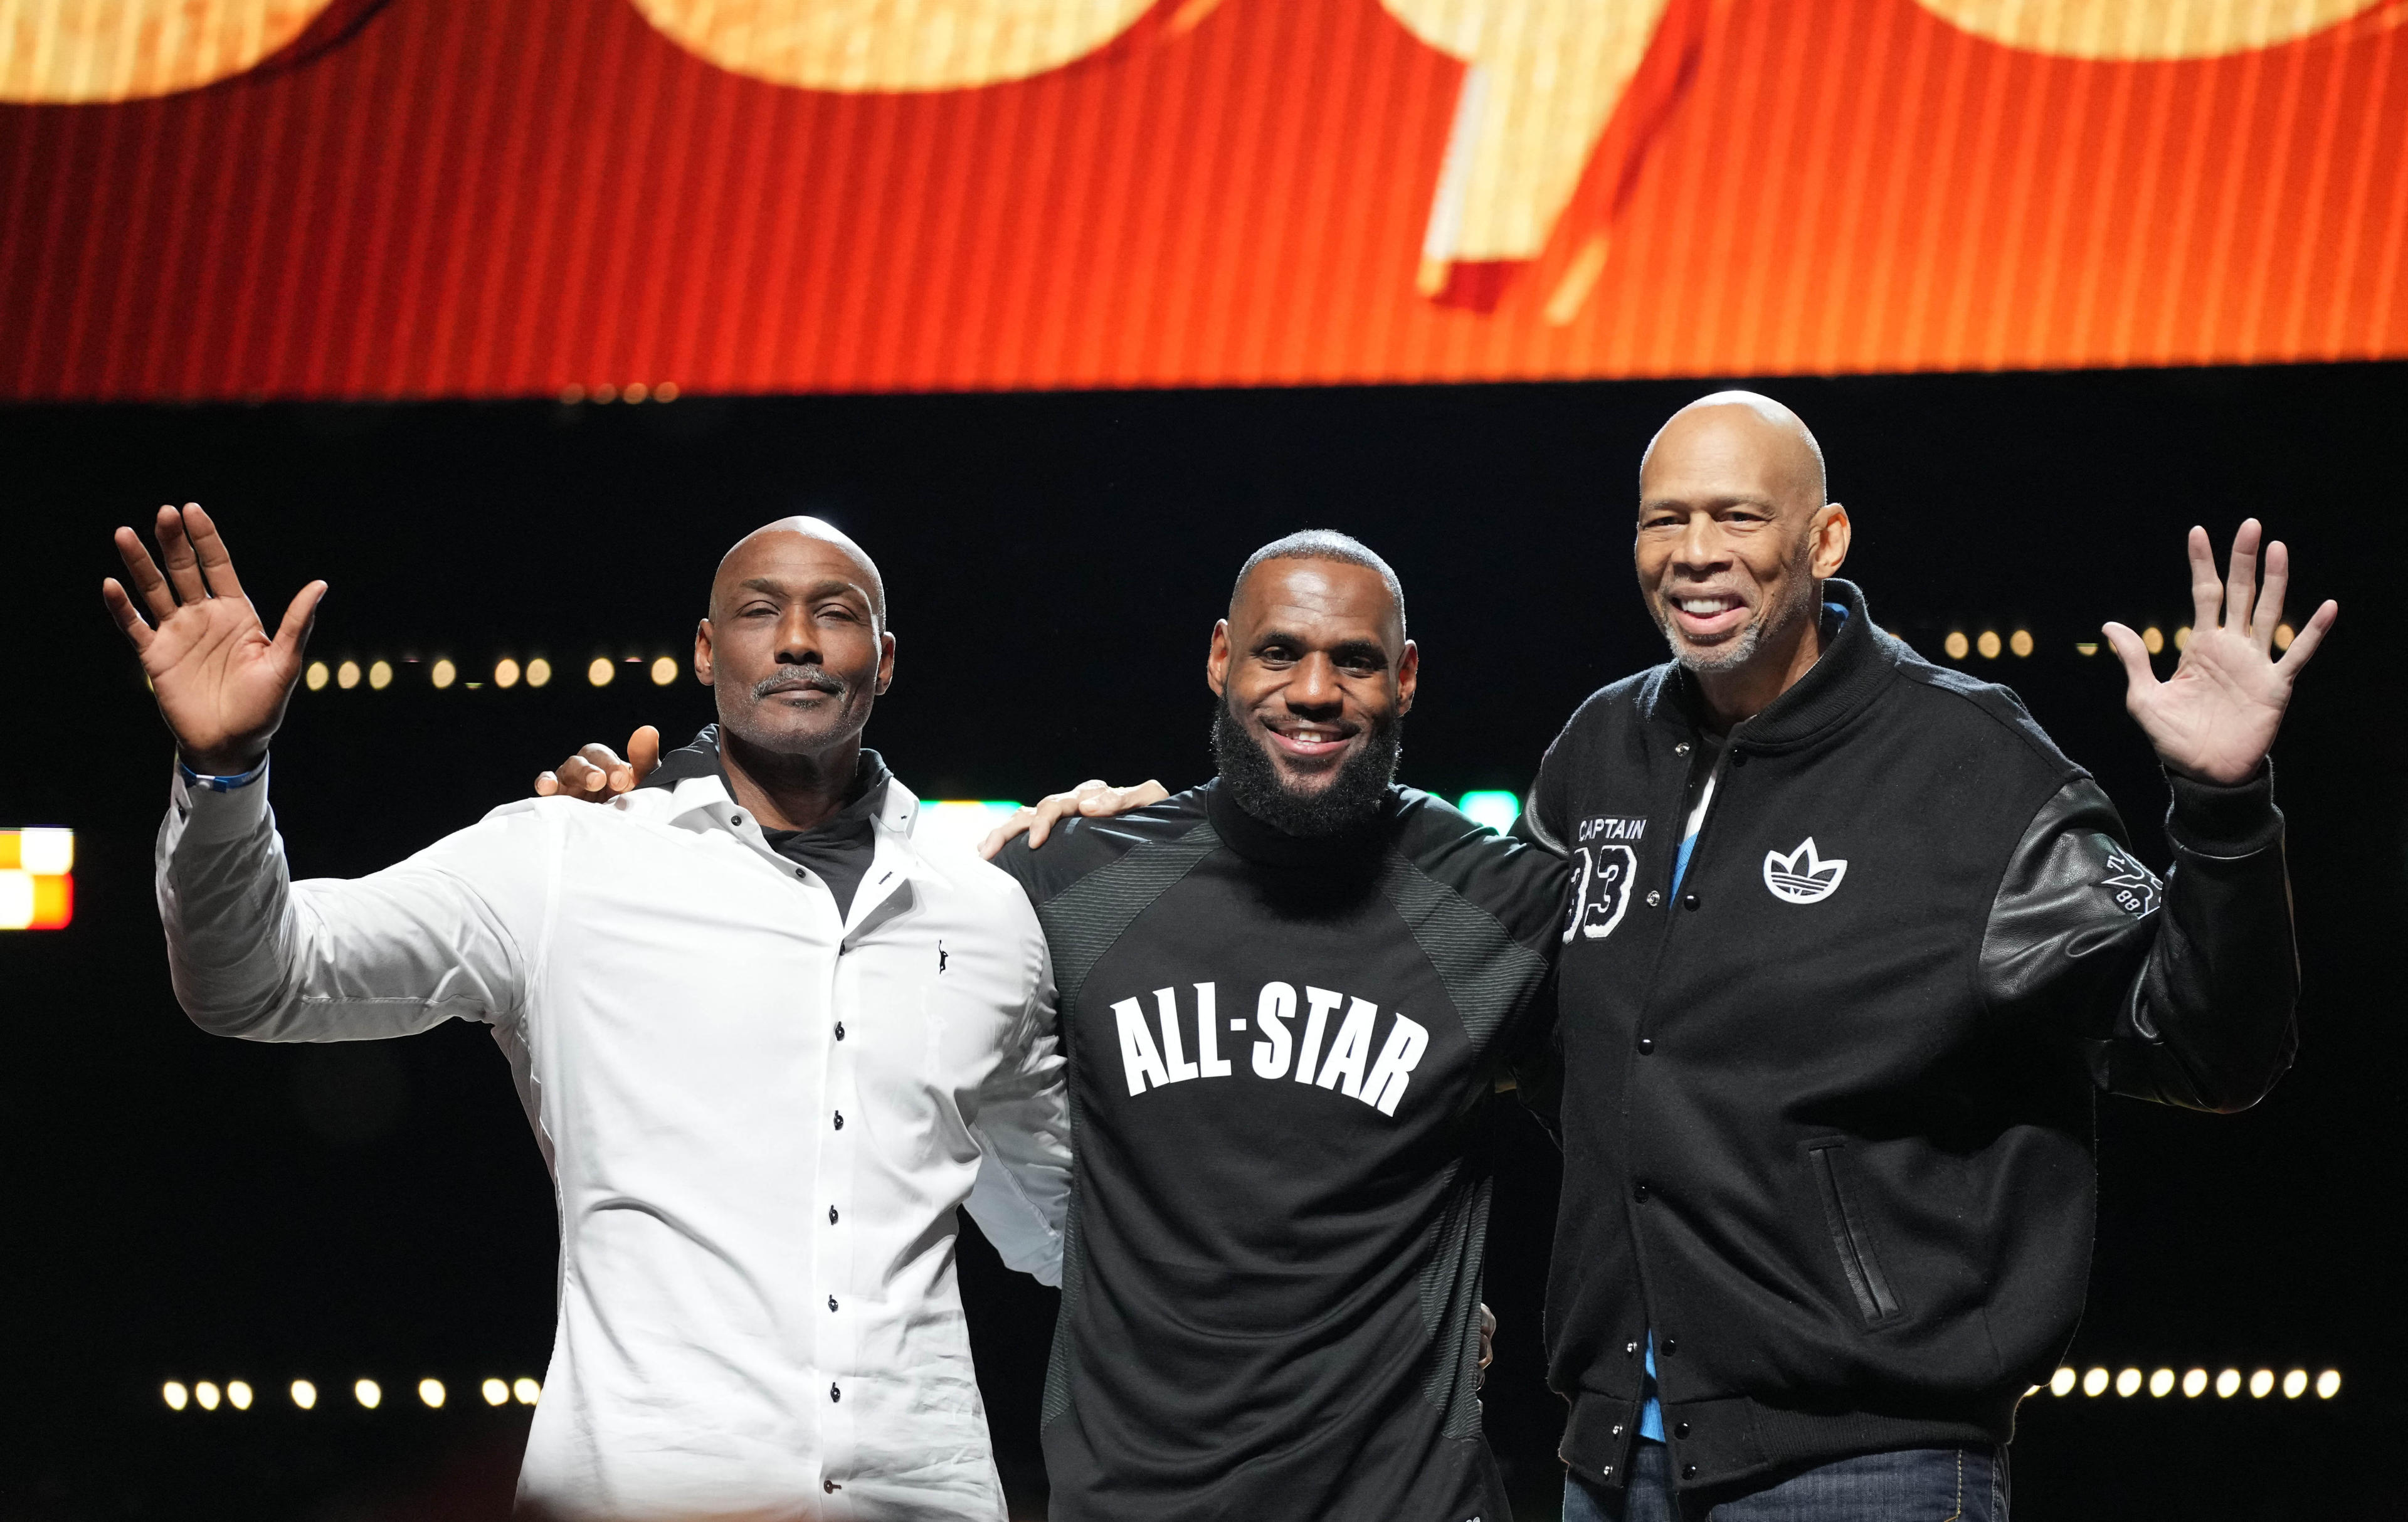 Feb 19, 2023; Salt Lake City, UT, USA; The top three NBA scoring leaders from left Karl Malone, LeBron James and Kareem Abdul-Jabbar pose for a photo in the 2023 NBA All-Star Game at Vivint Arena. Mandatory Credit: Kyle Terada-USA TODAY Sports